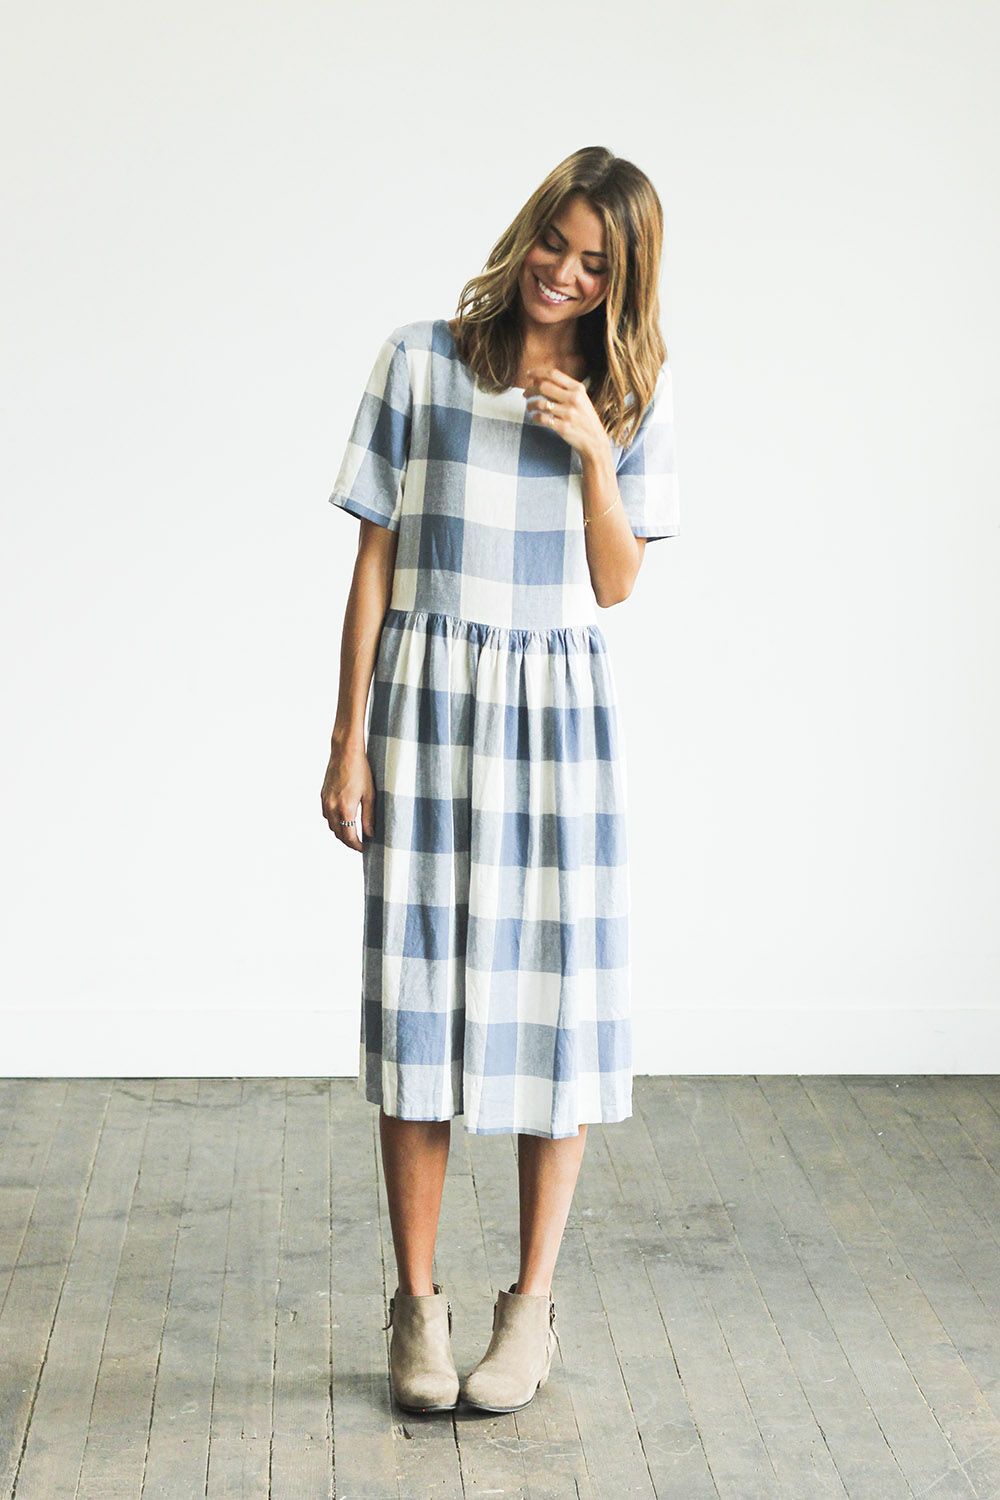 Picnic Dress // CLAD I love this modest midi blue gingham dress from Clad and Cloth!